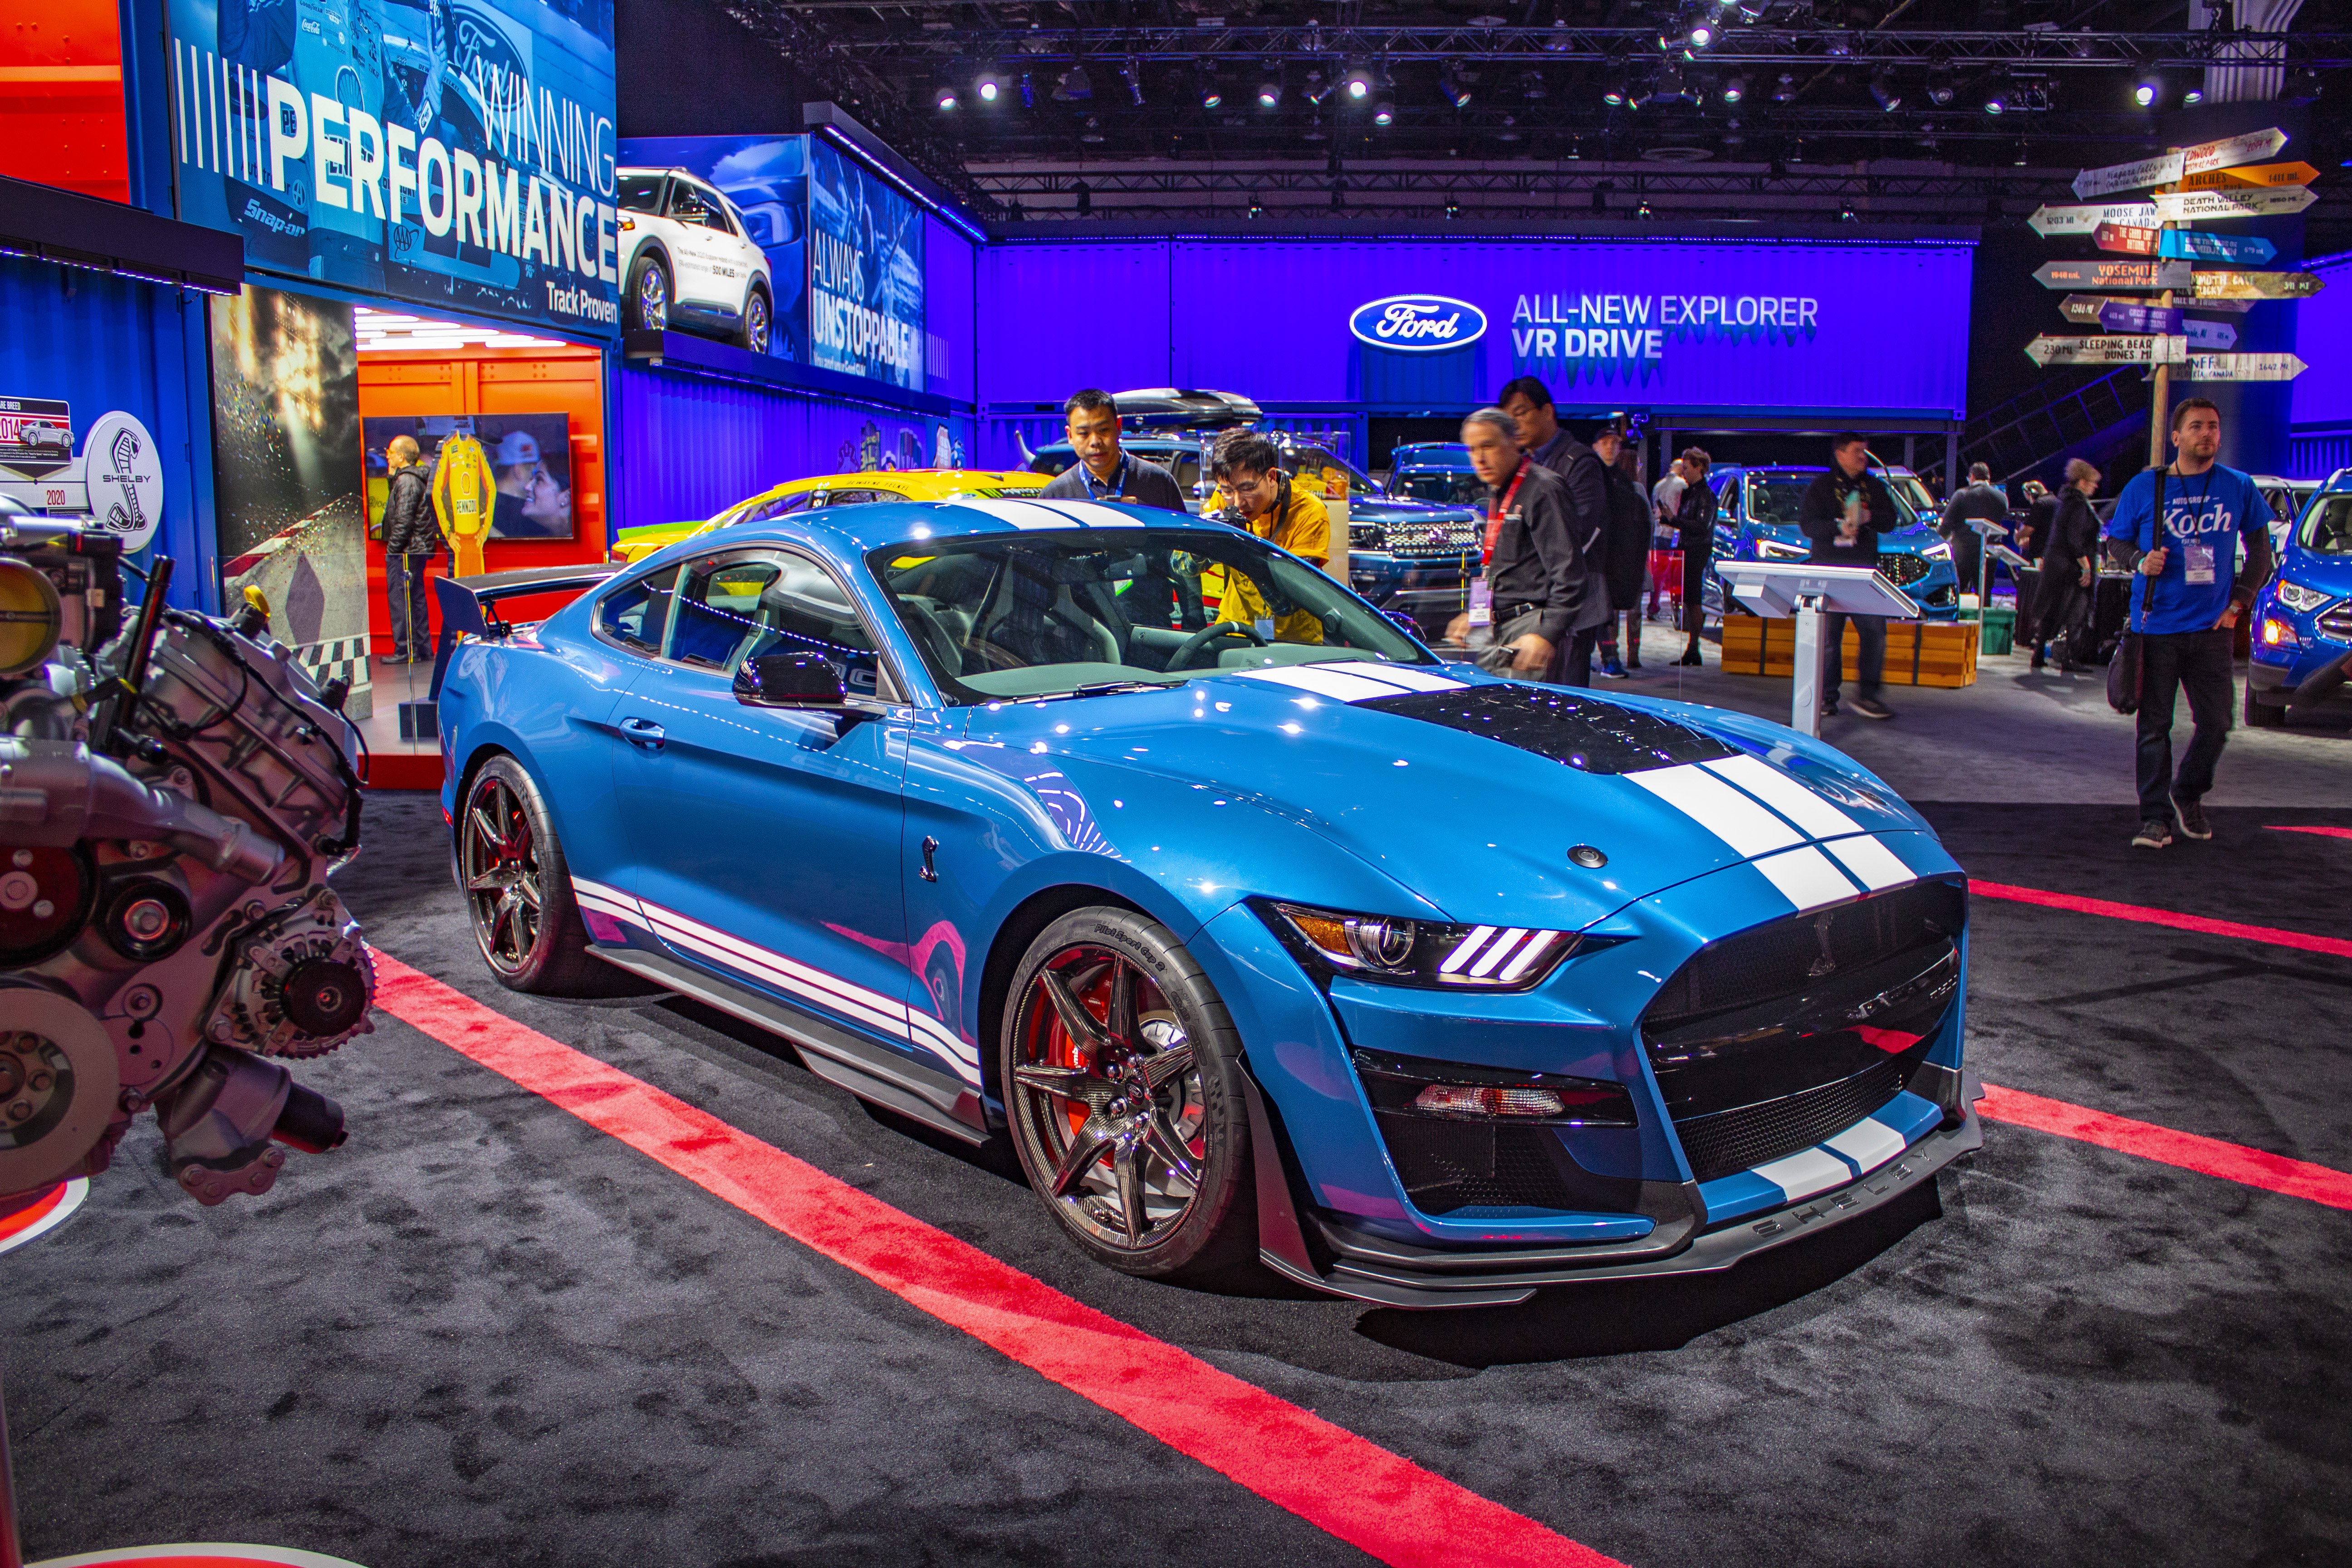 Download-2020-Ford-Mustang-Shelby-Gt500-Pictures,-Photos-...